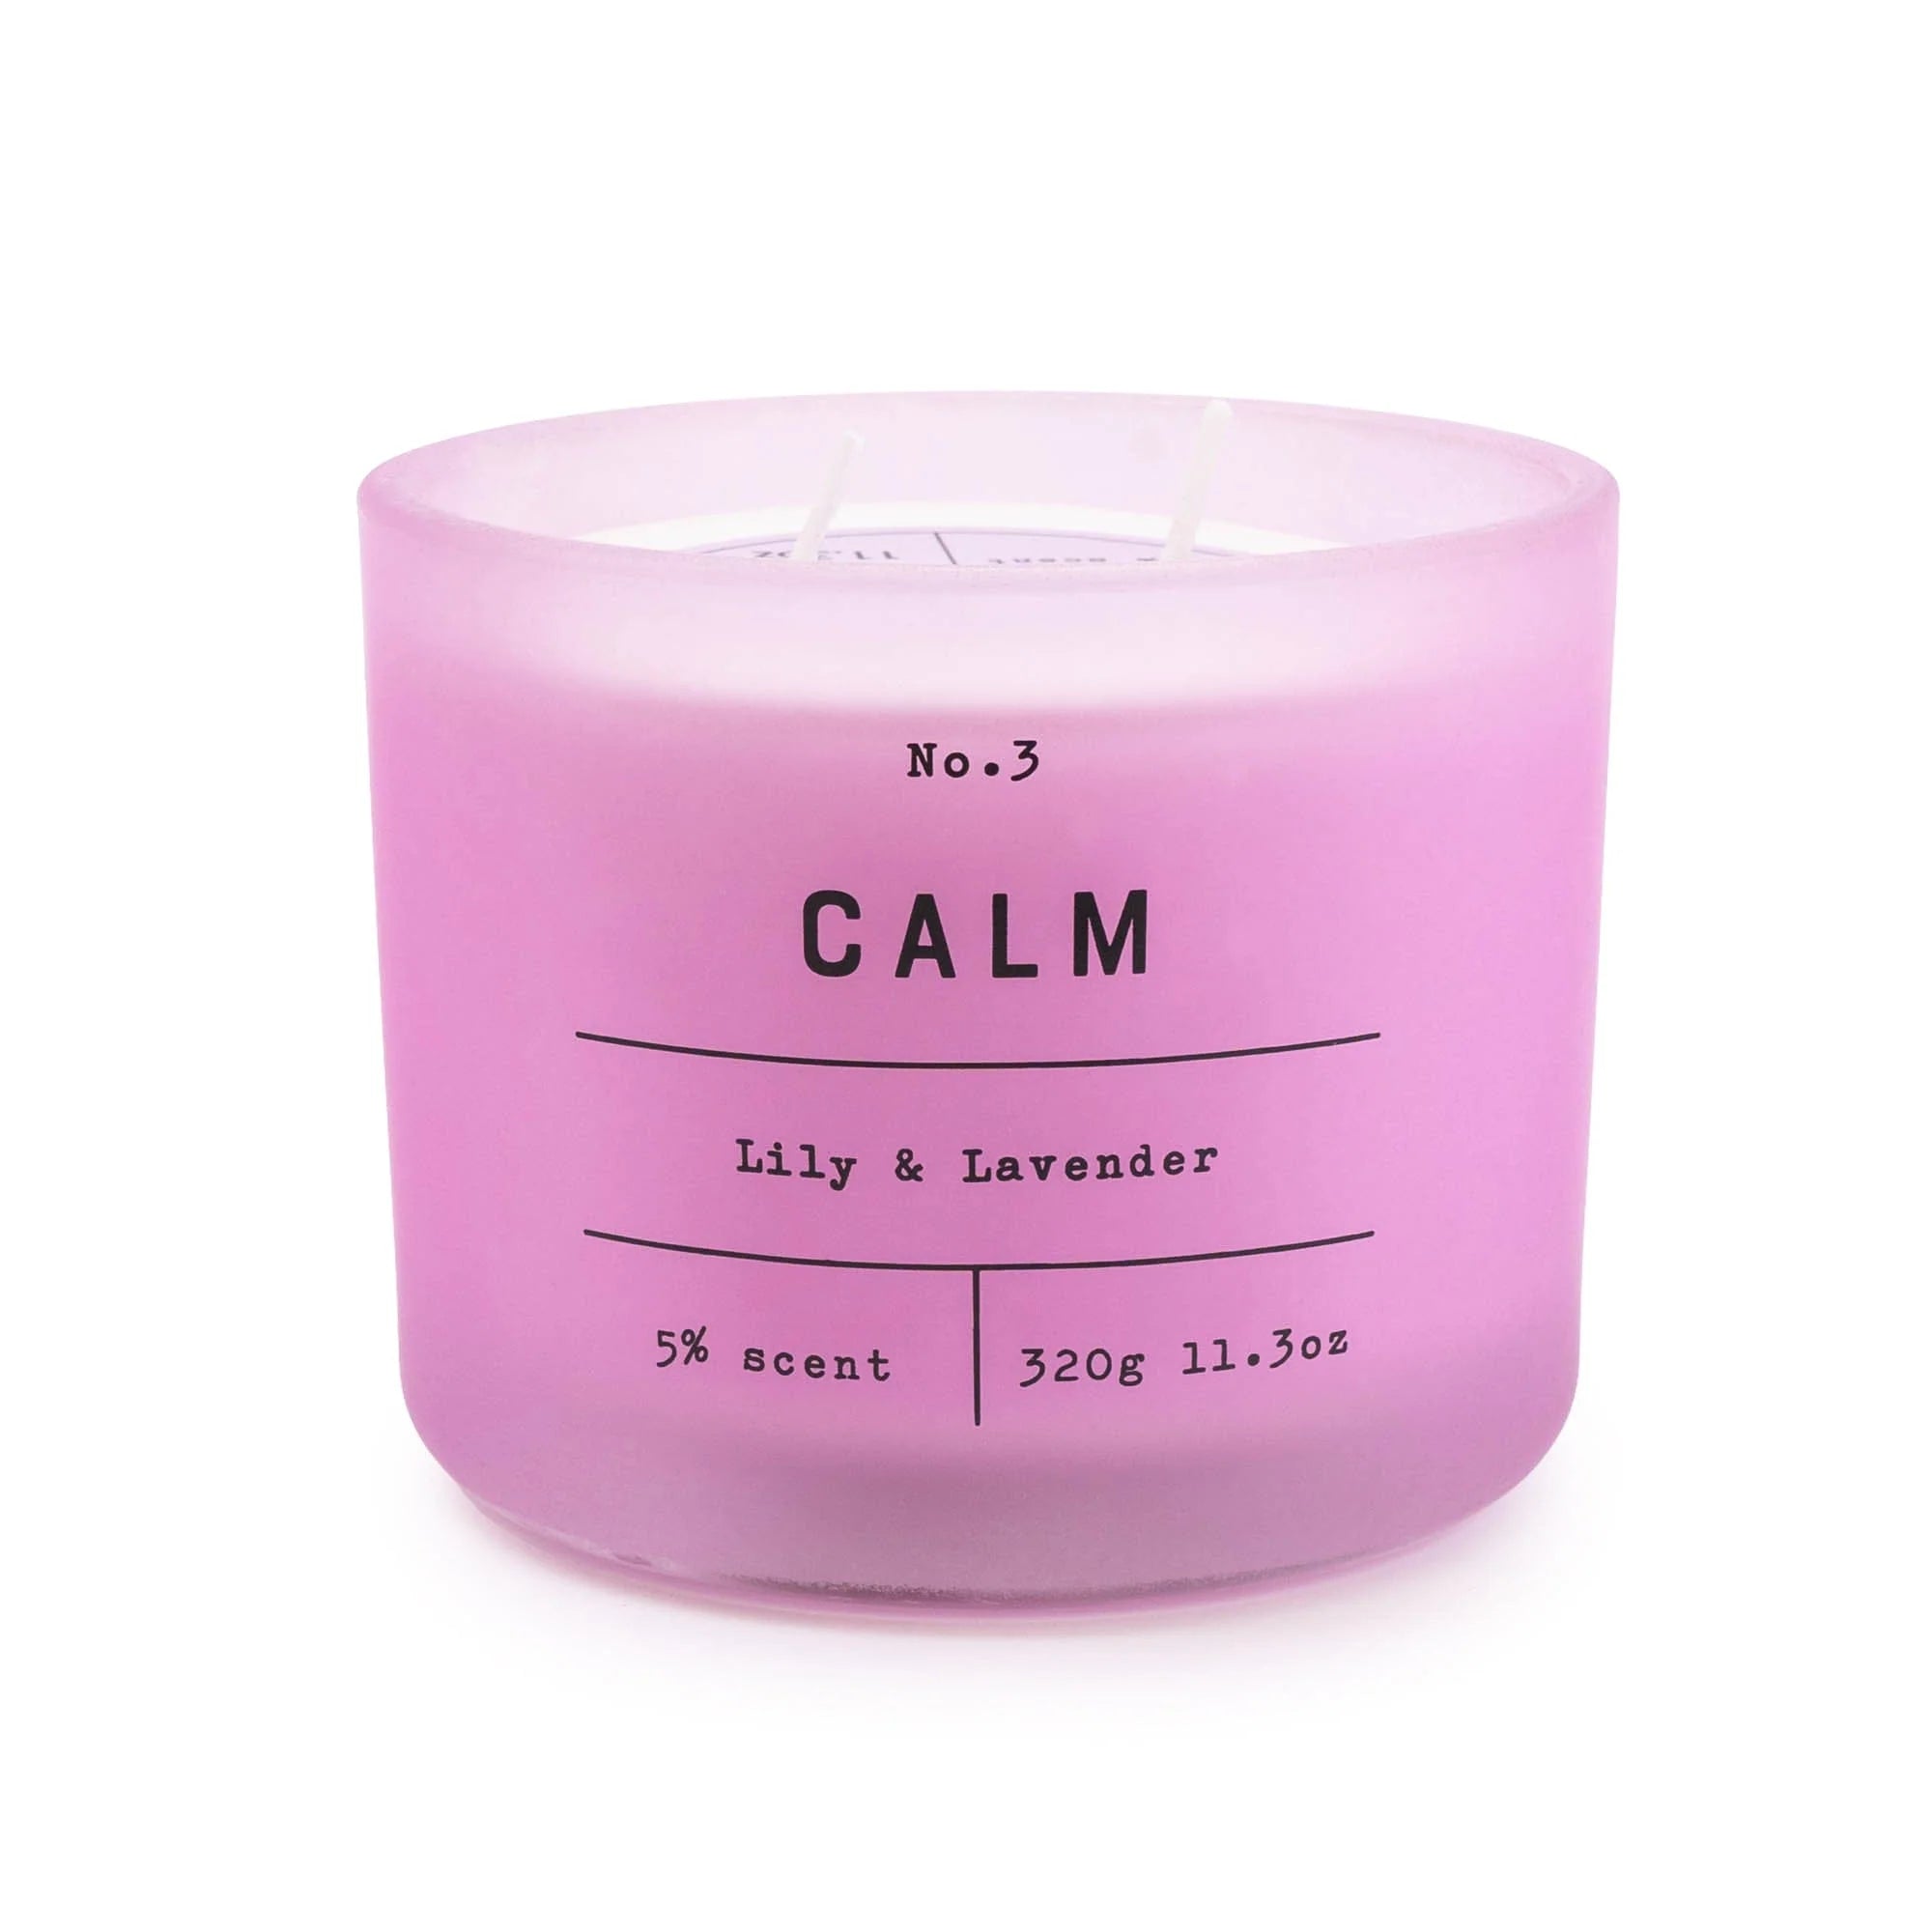 Pink frosted glass two wick candle with a 'calming' fragrance of lily and lavender